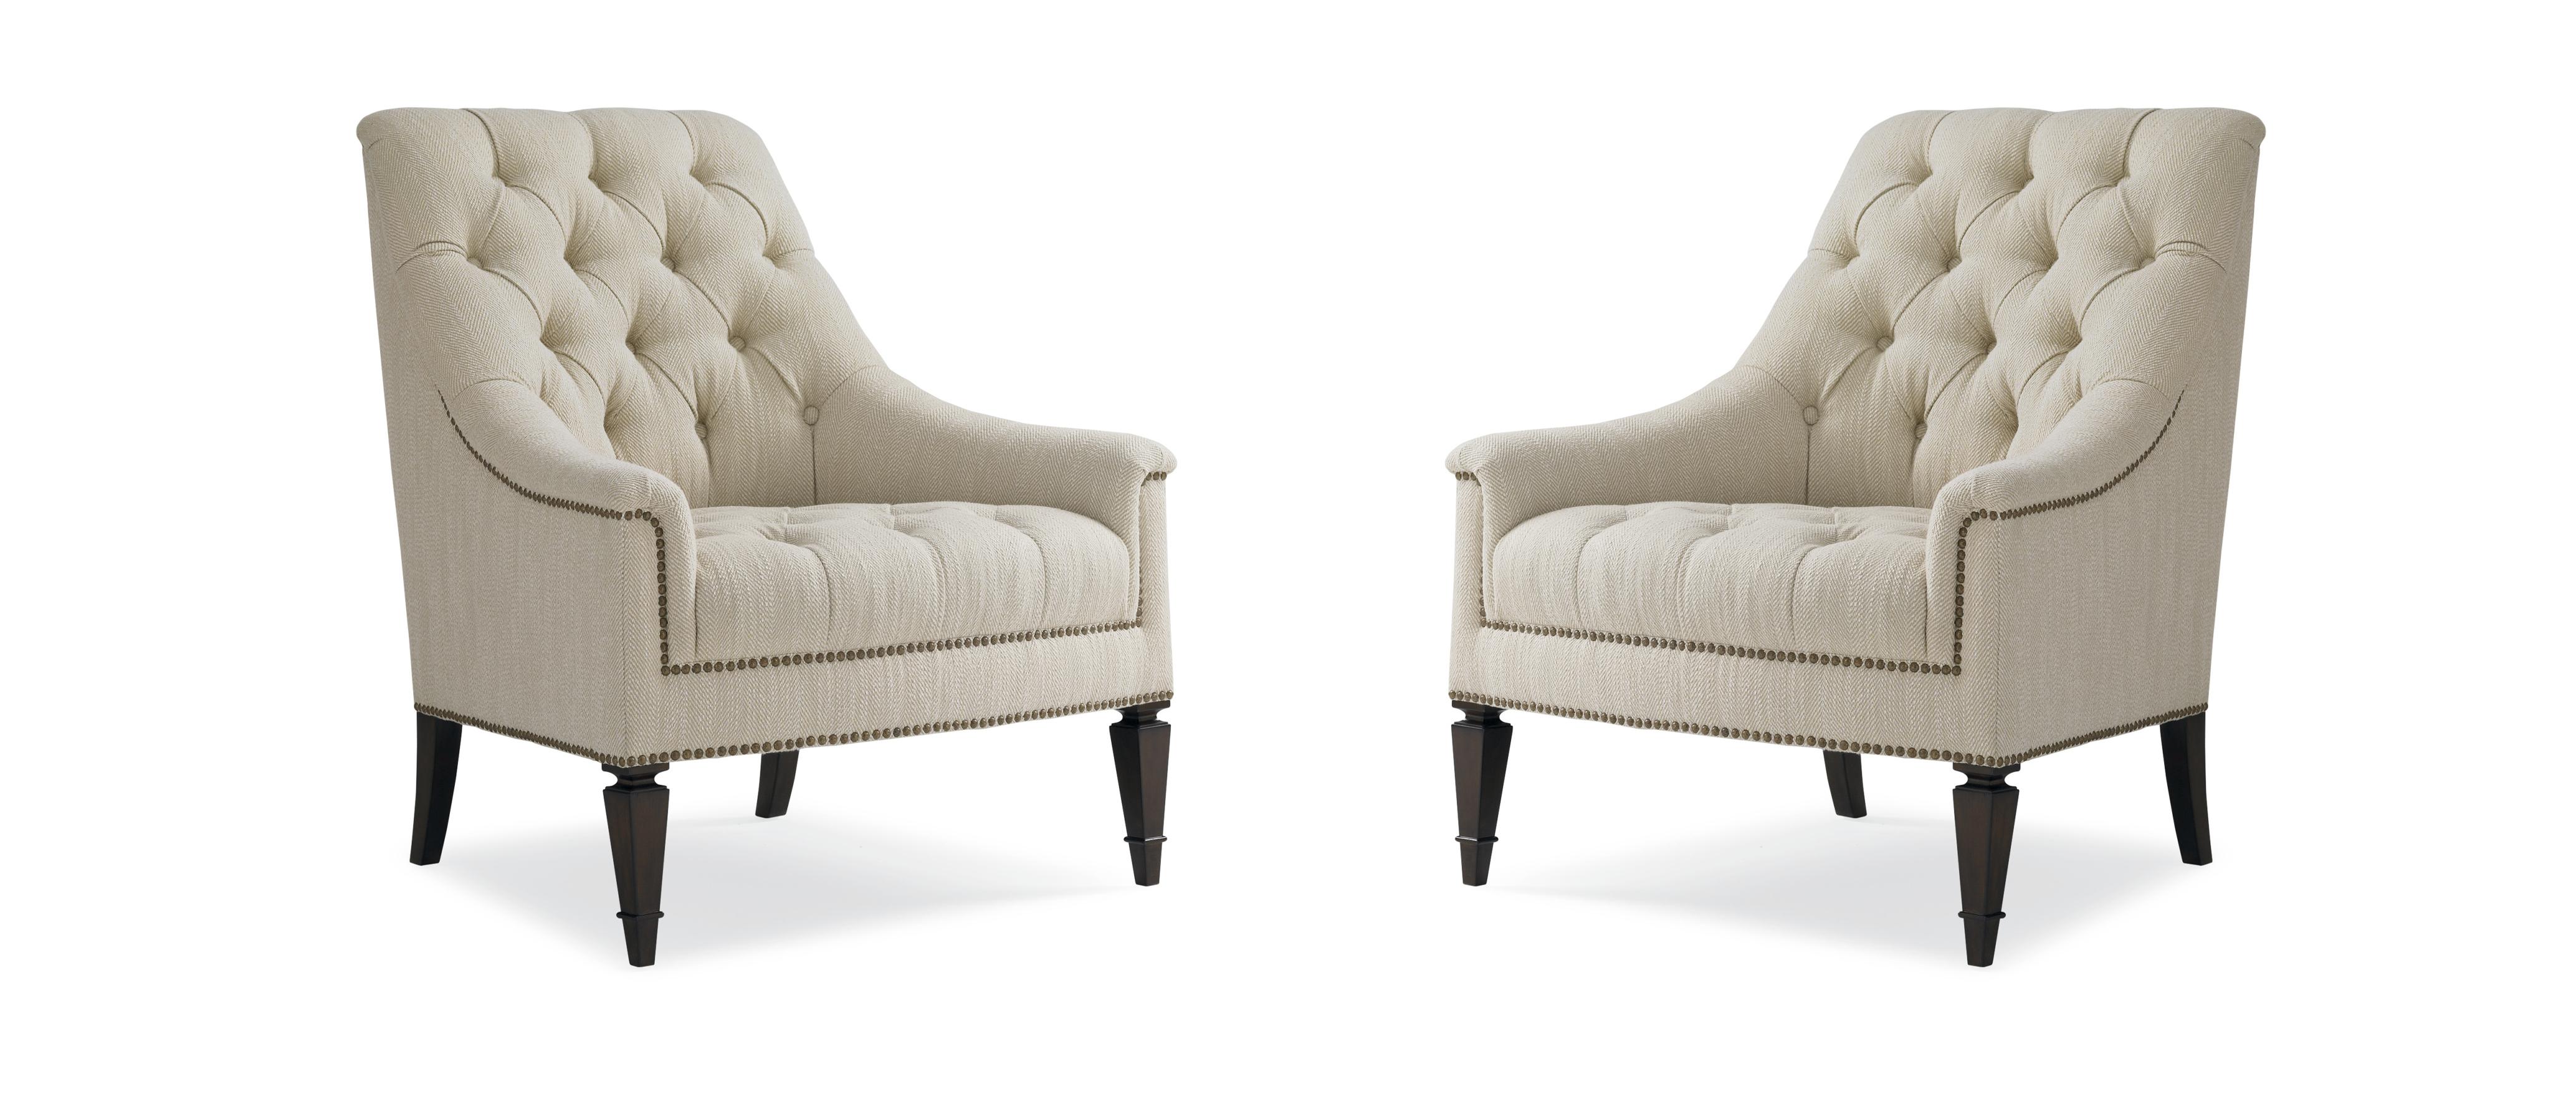 

    
Button-Tufted Natural Textured Herringbone Fabric Chair Set 2Pcs CLASSIC ELEGANCE by Caracole
